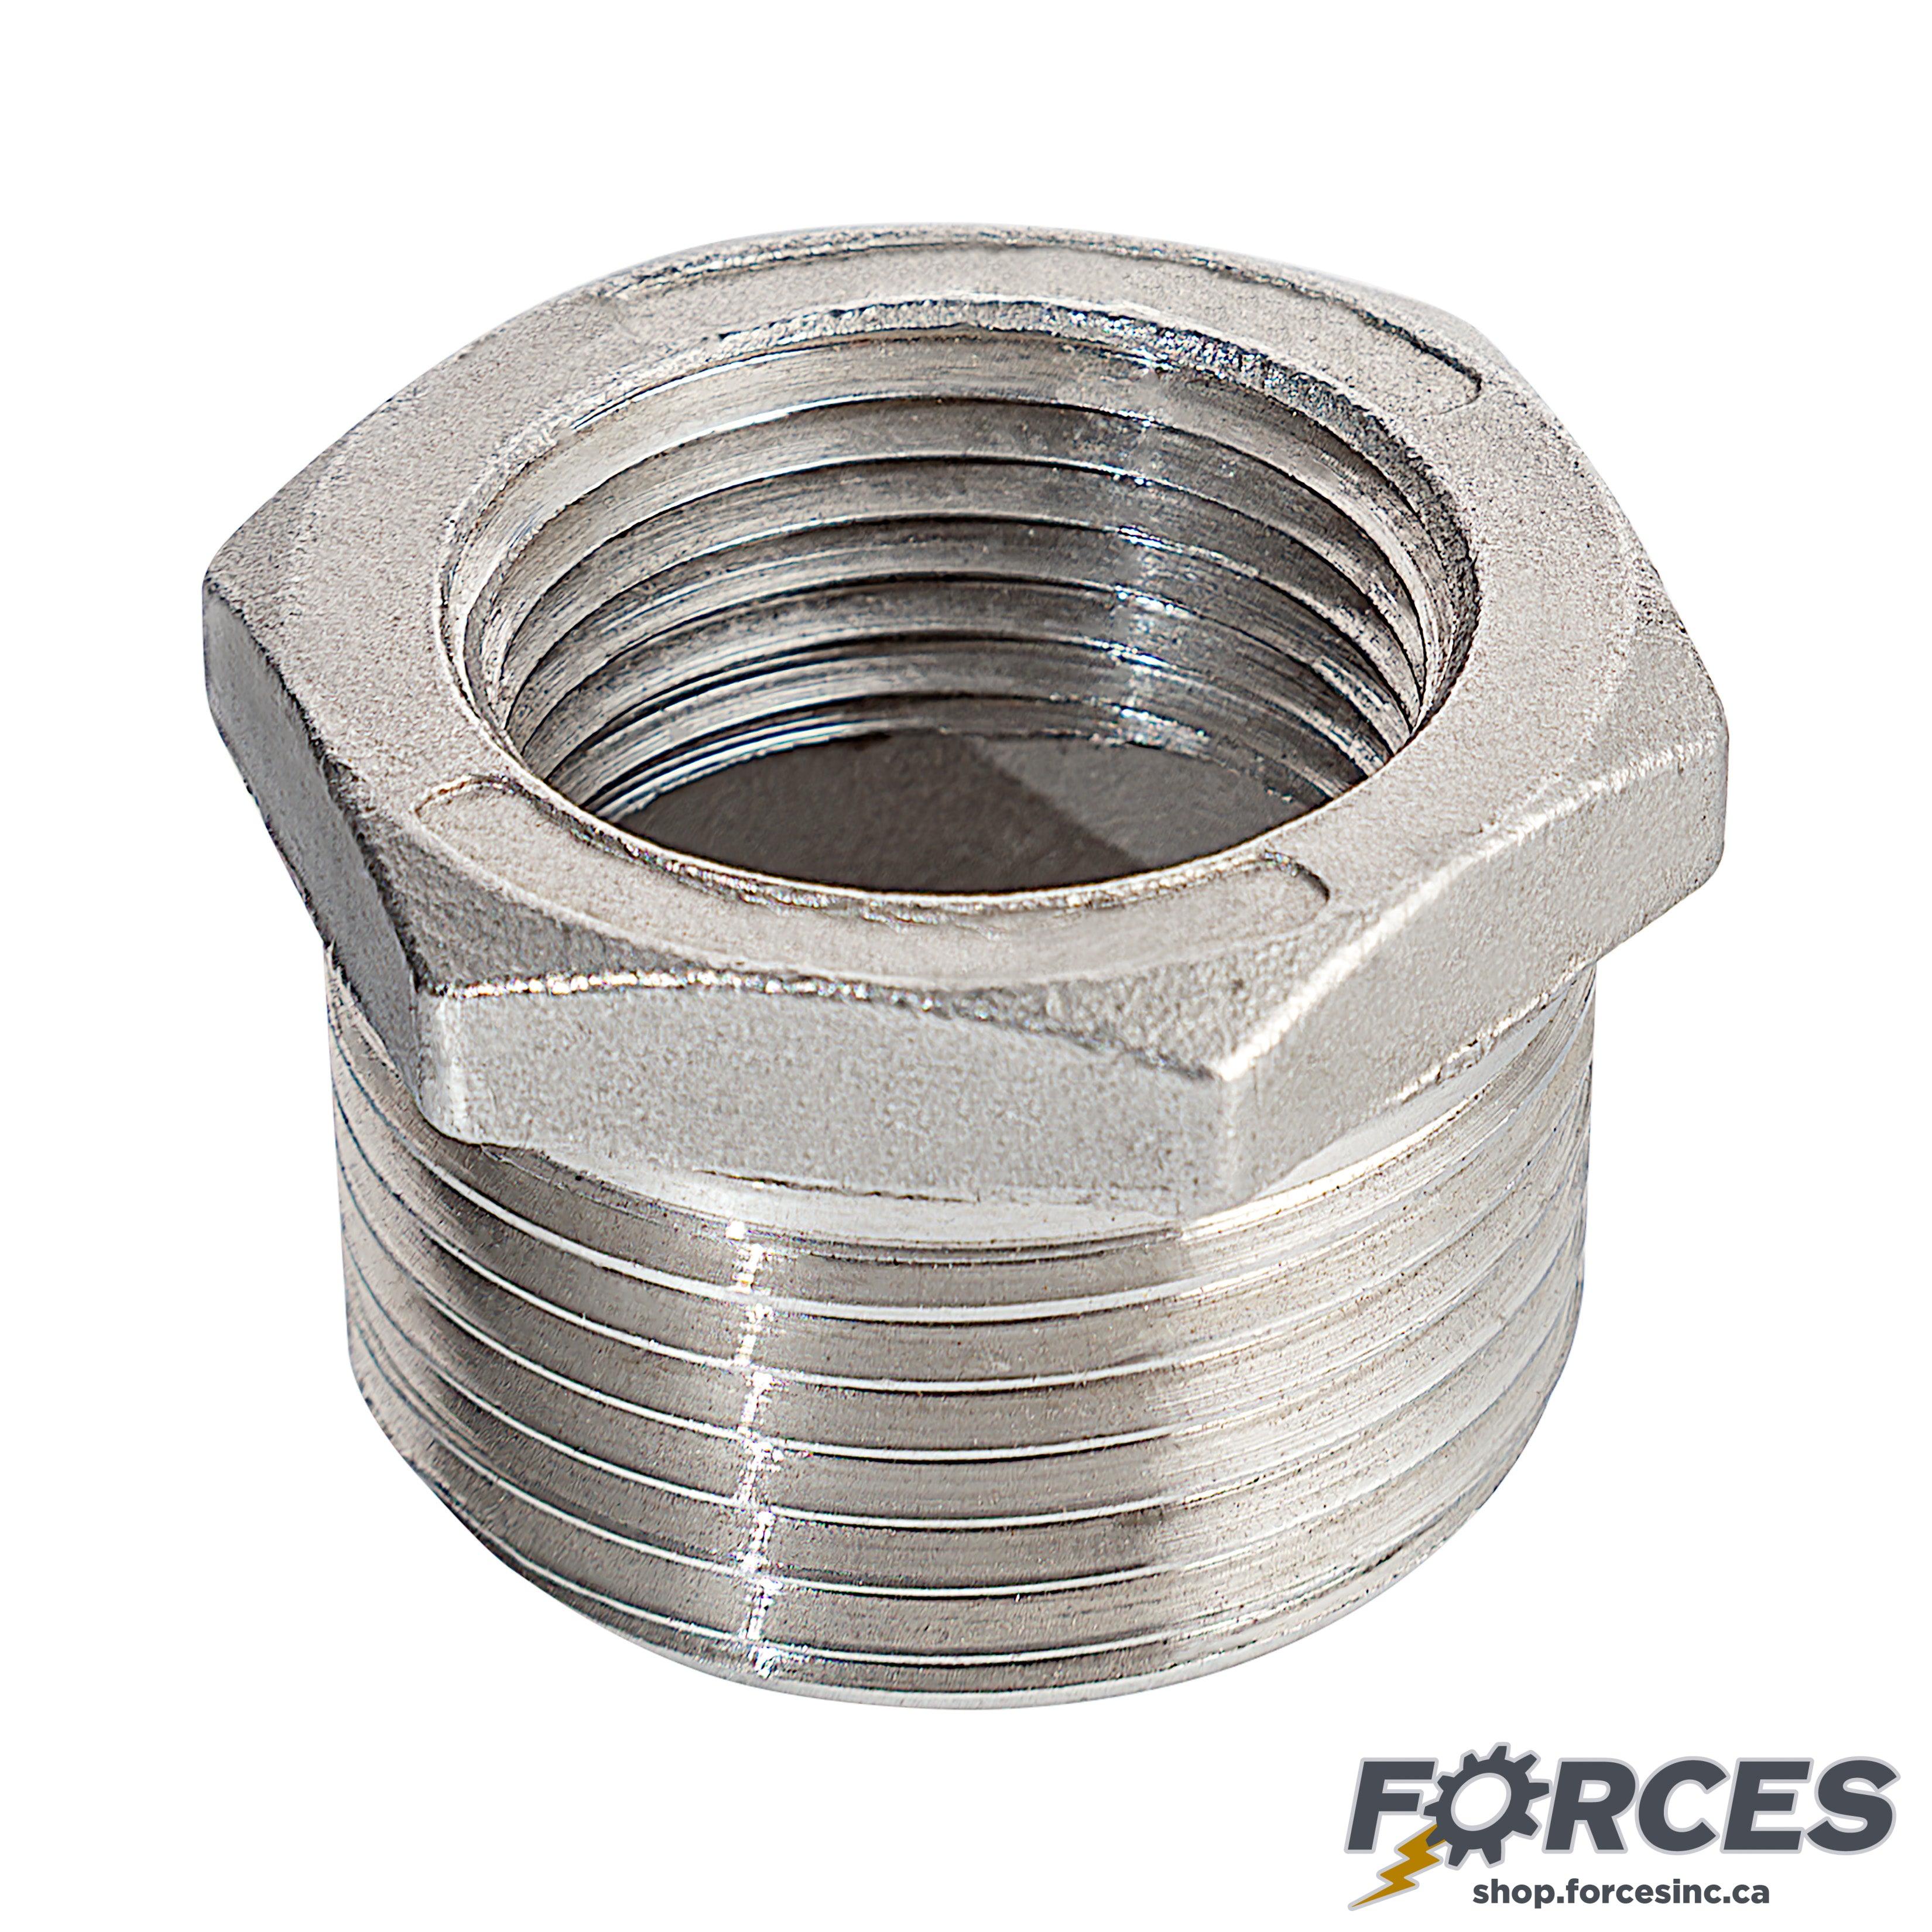 1-1/2" (M) x 1/2" (F) Reducing Hex Bushing NPT #150 - Stainless Steel 316 - Forces Inc